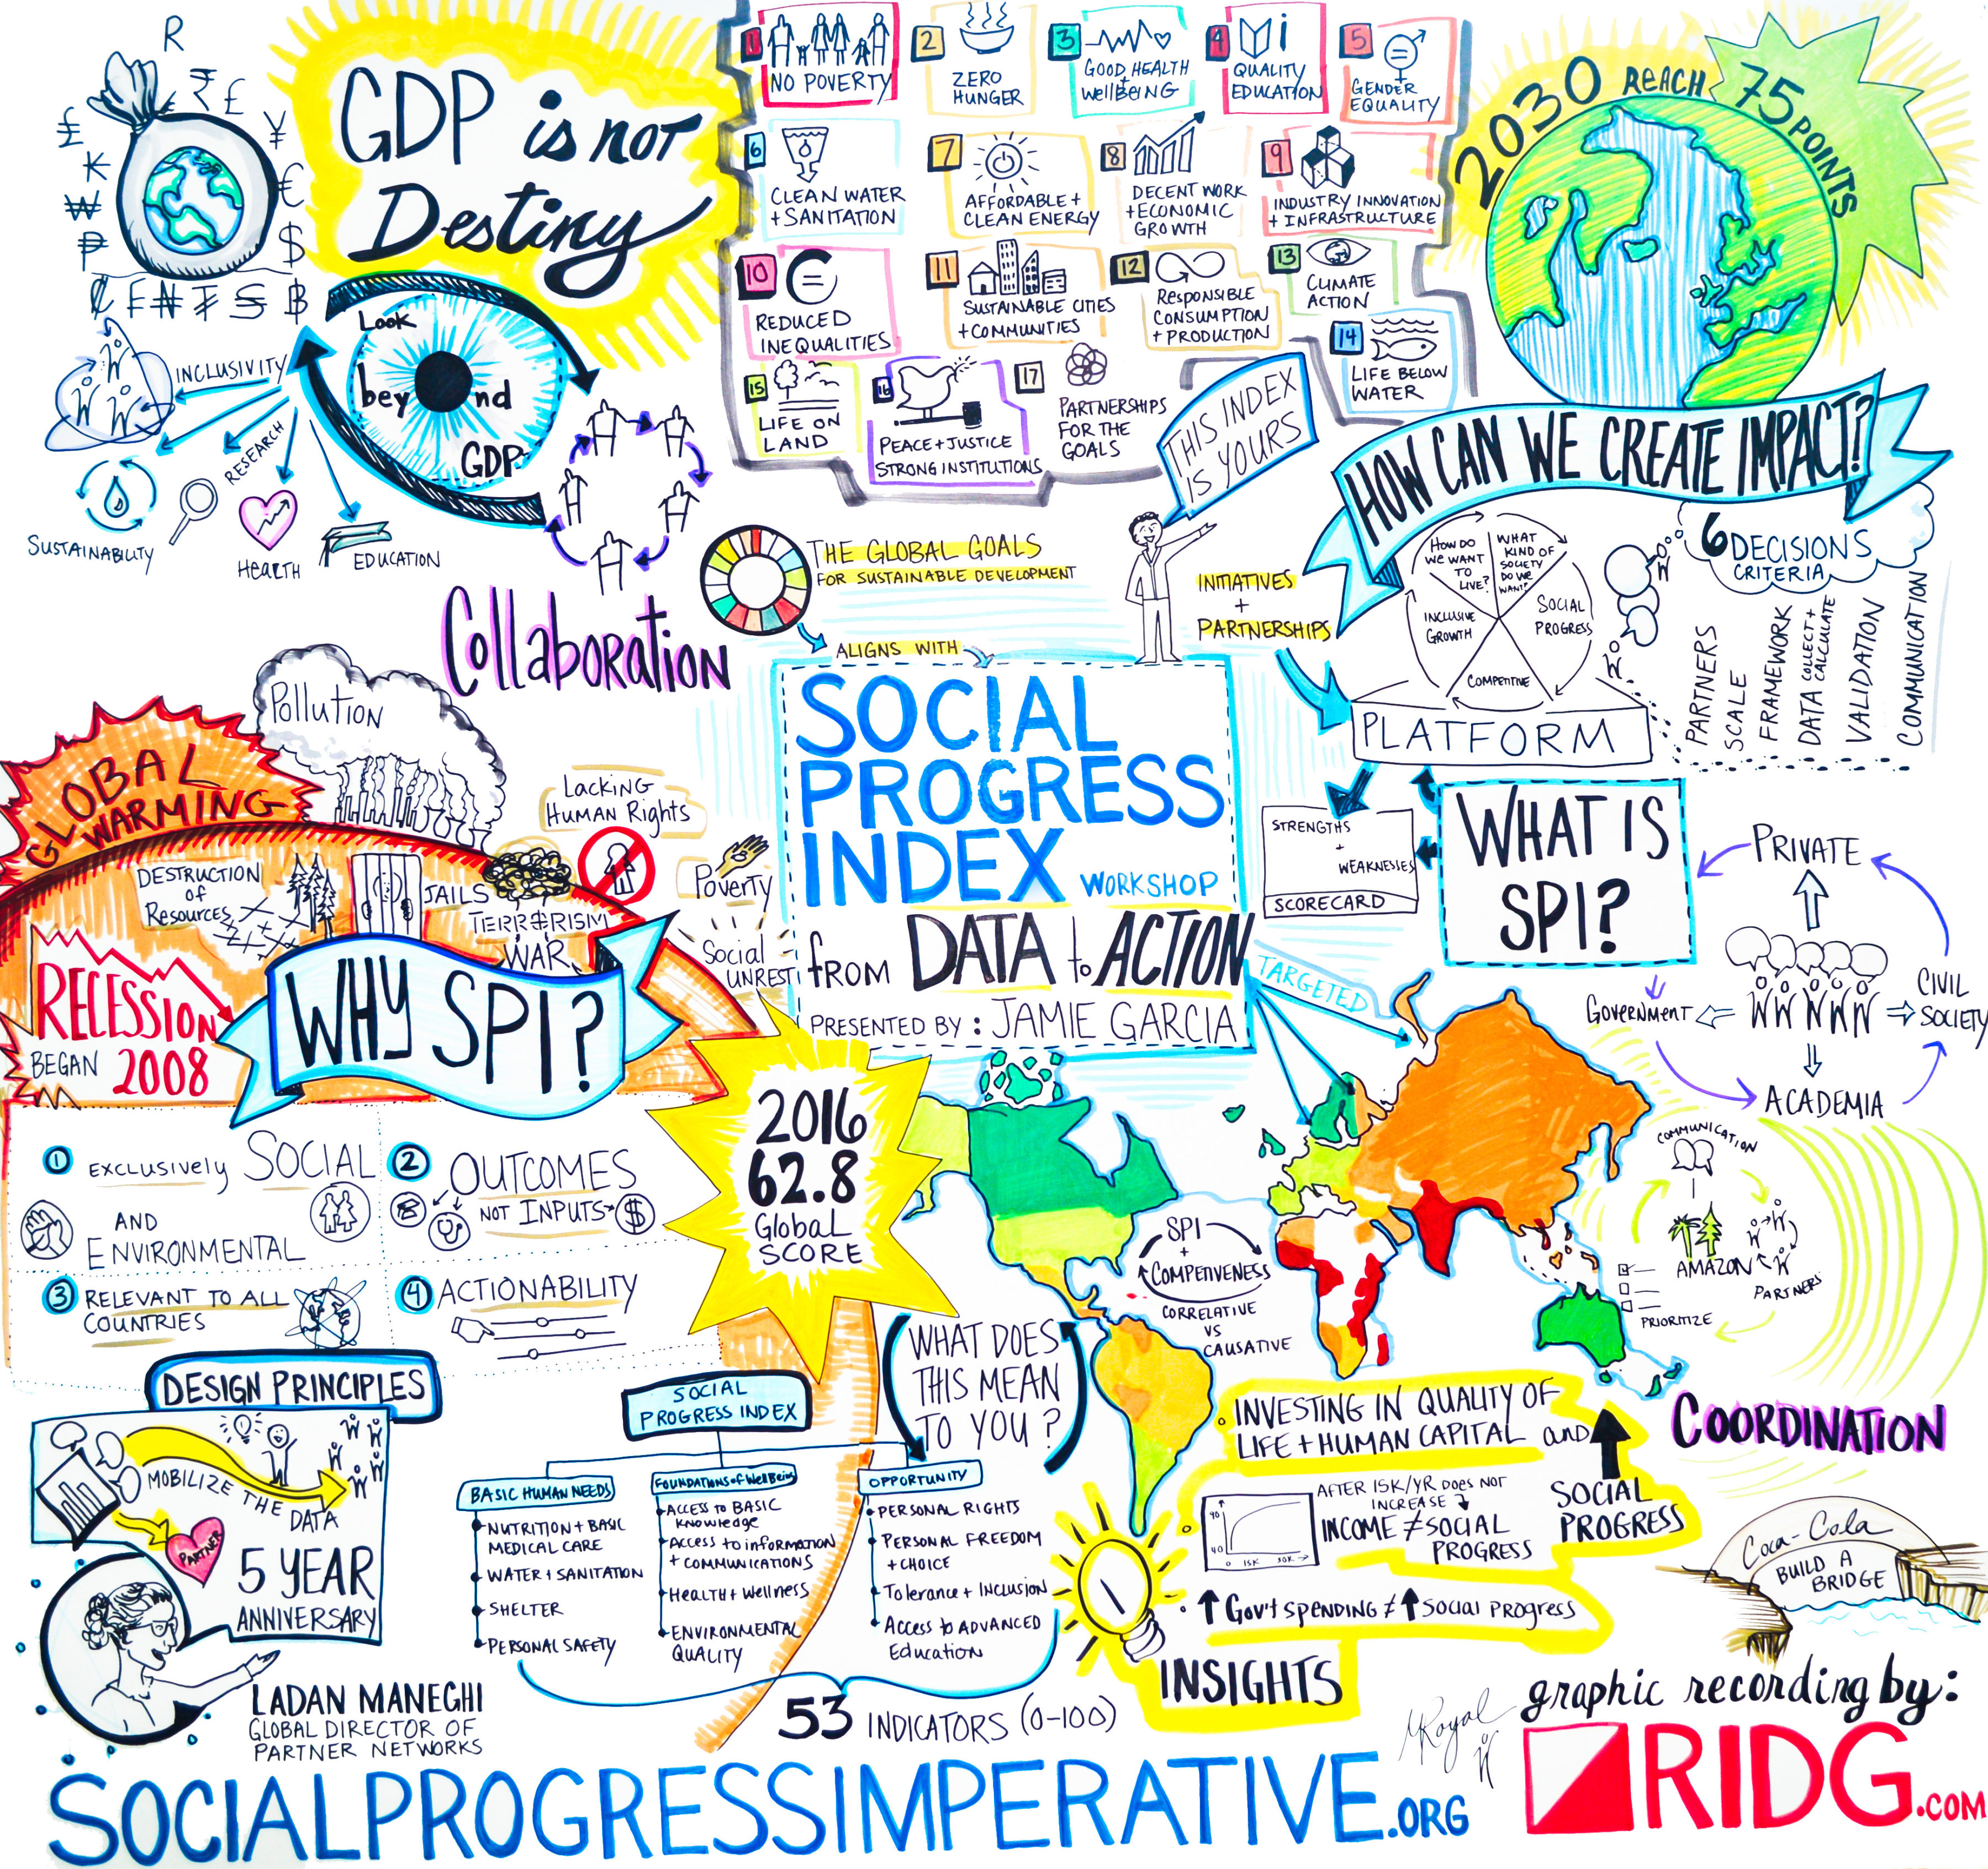 Highlights from the Social Progress Imperative 2017 Summit